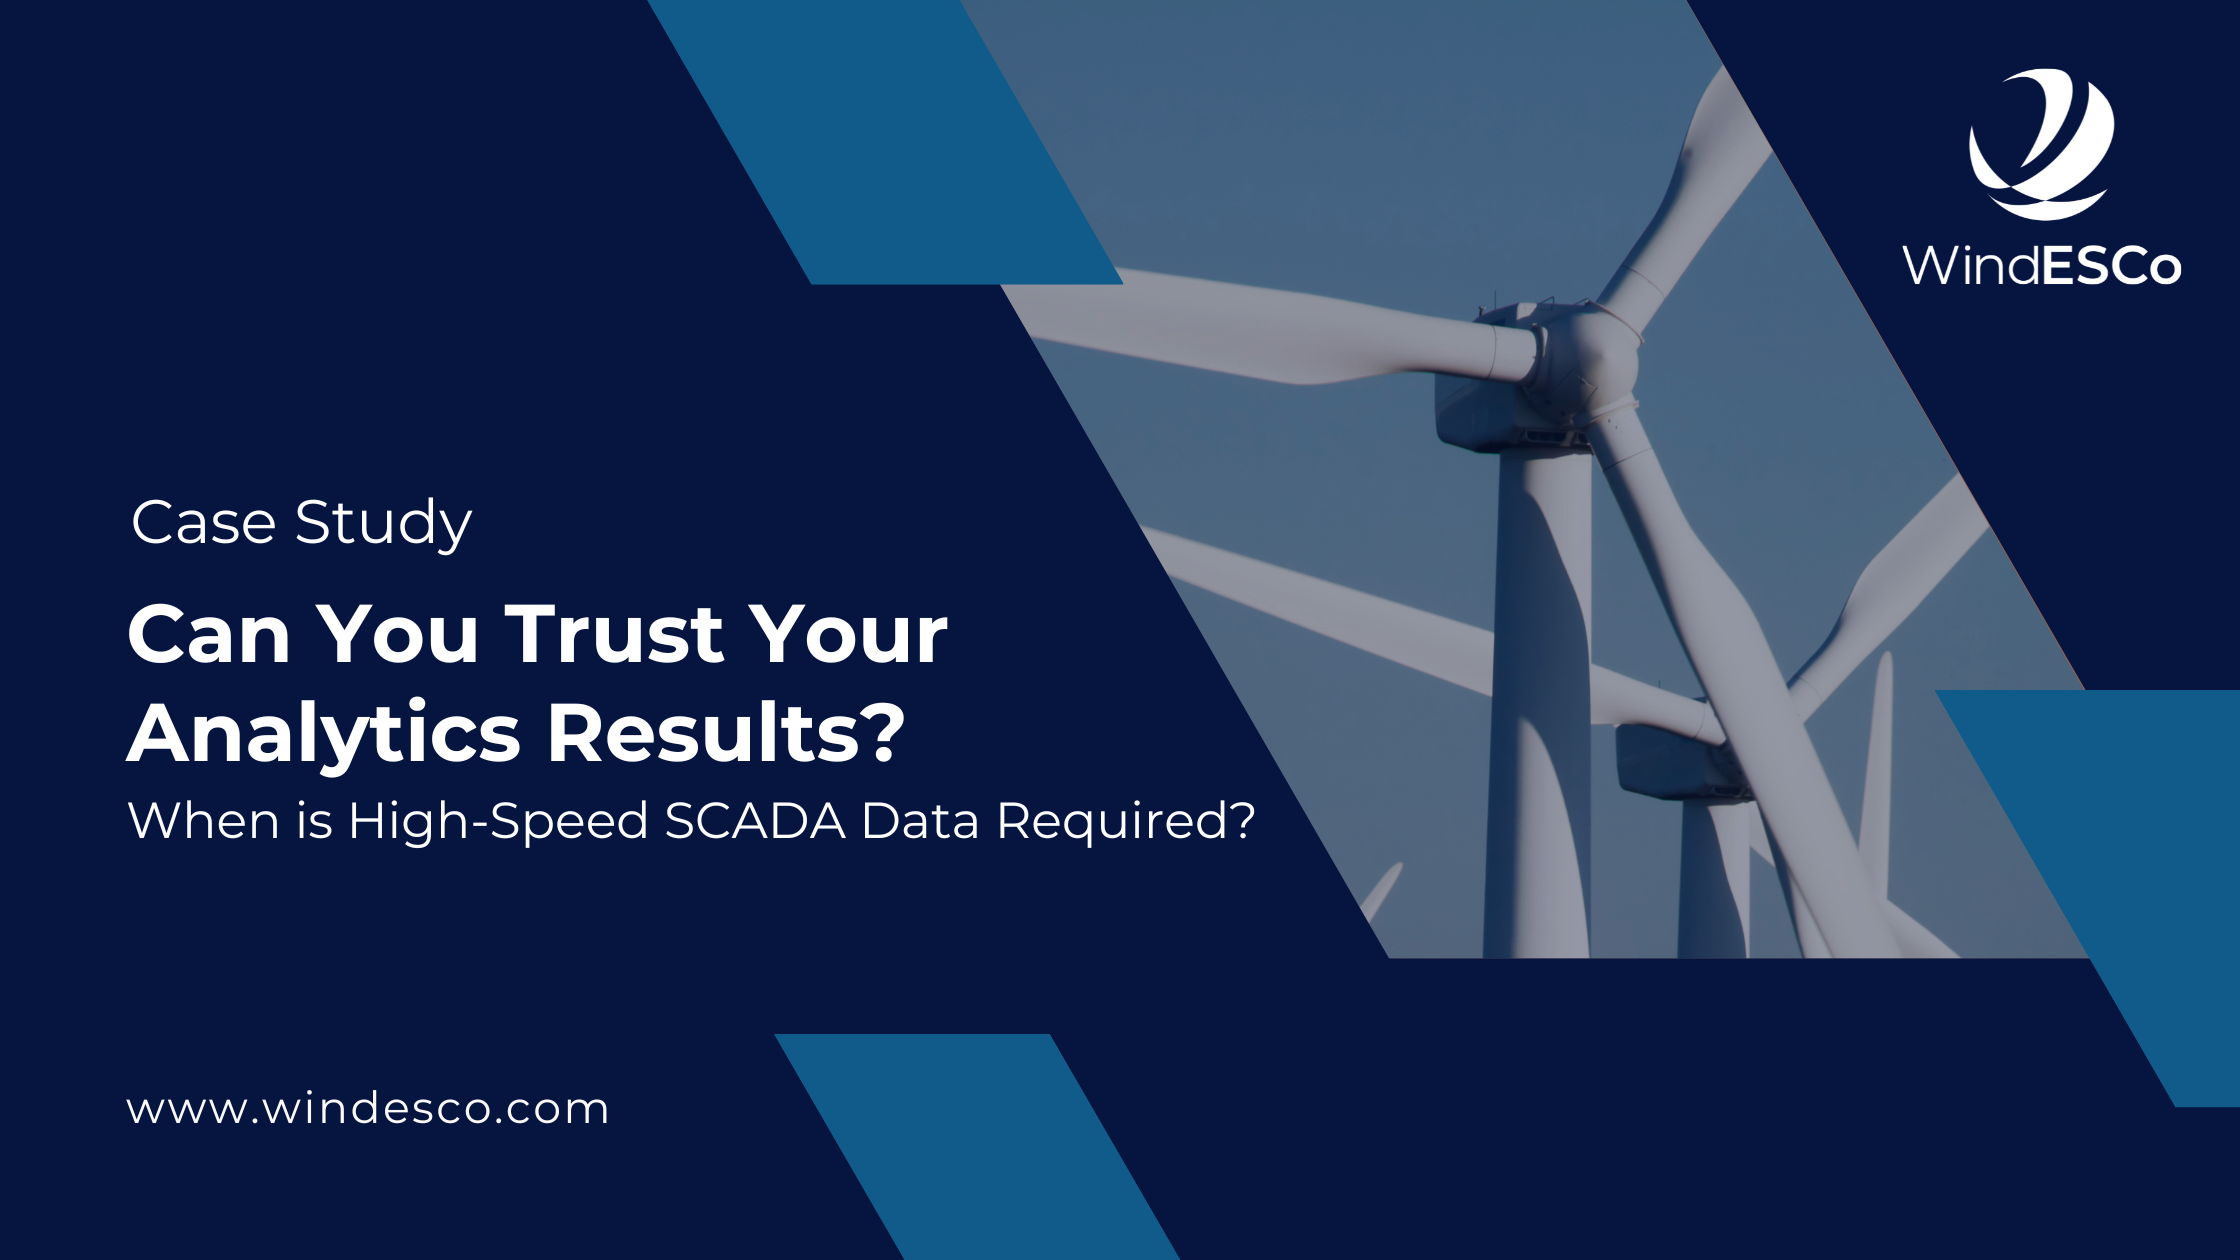 Case Study: Can You Trust Your Analytics Results?